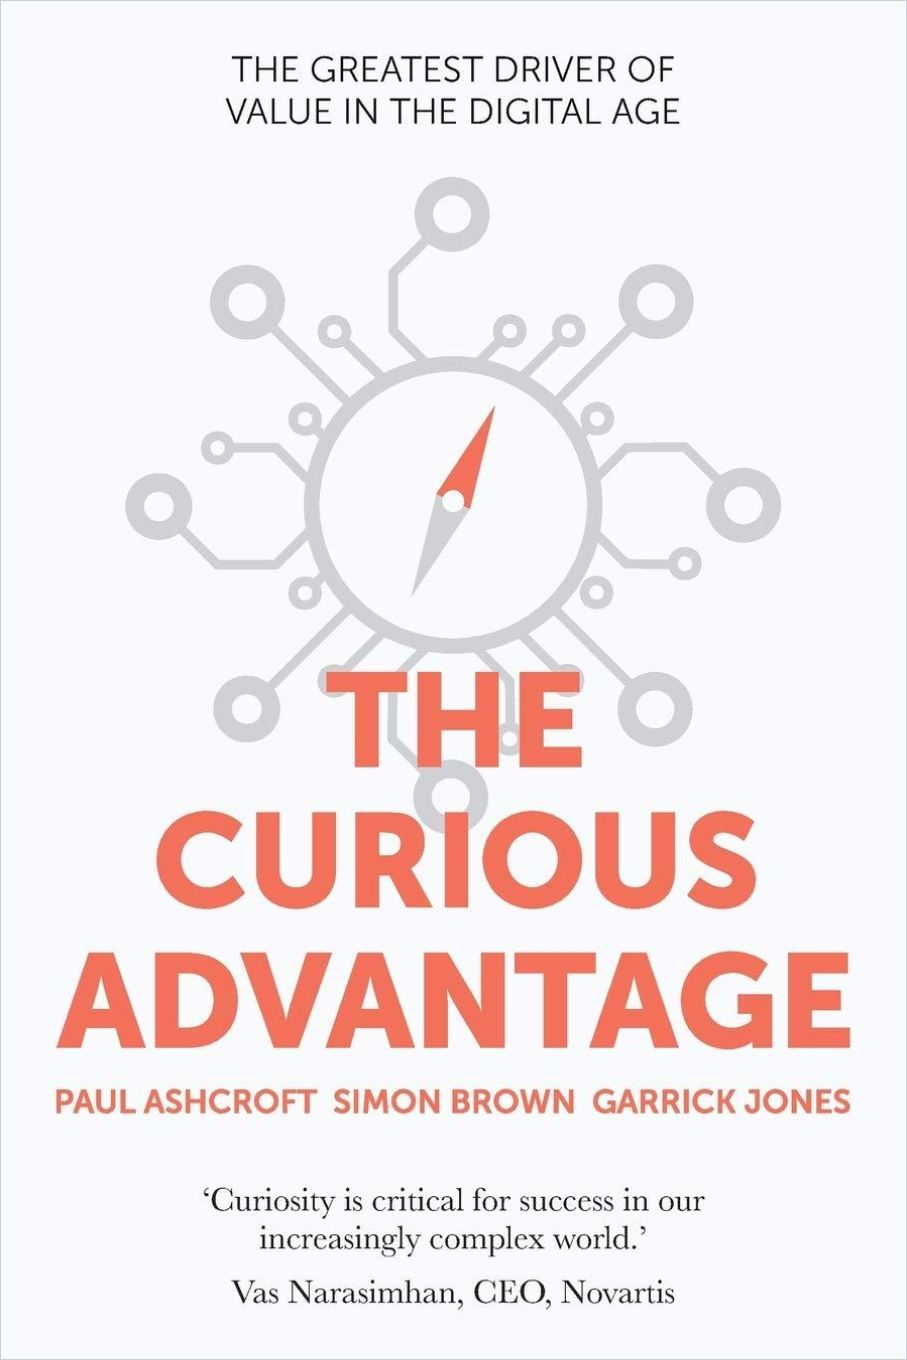 Image of: The Curious Advantage